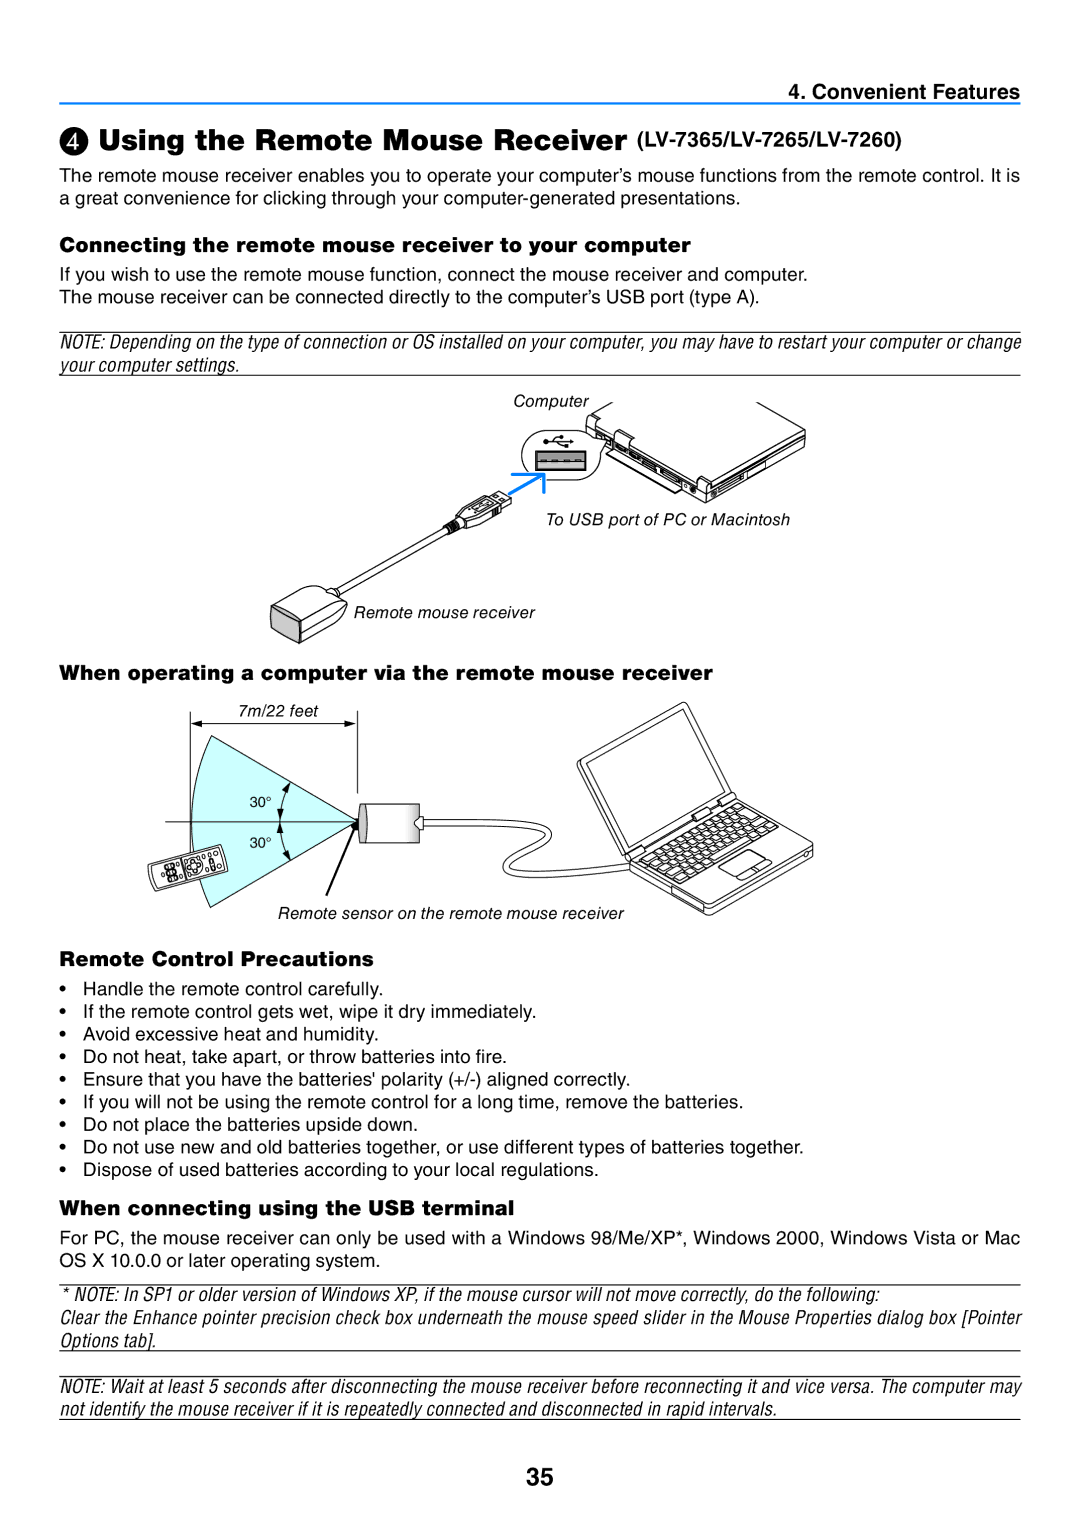 Canon user manual ❹ Using the Remote Mouse Receiver LV-7365/LV-7265/LV-7260, Convenient Features 